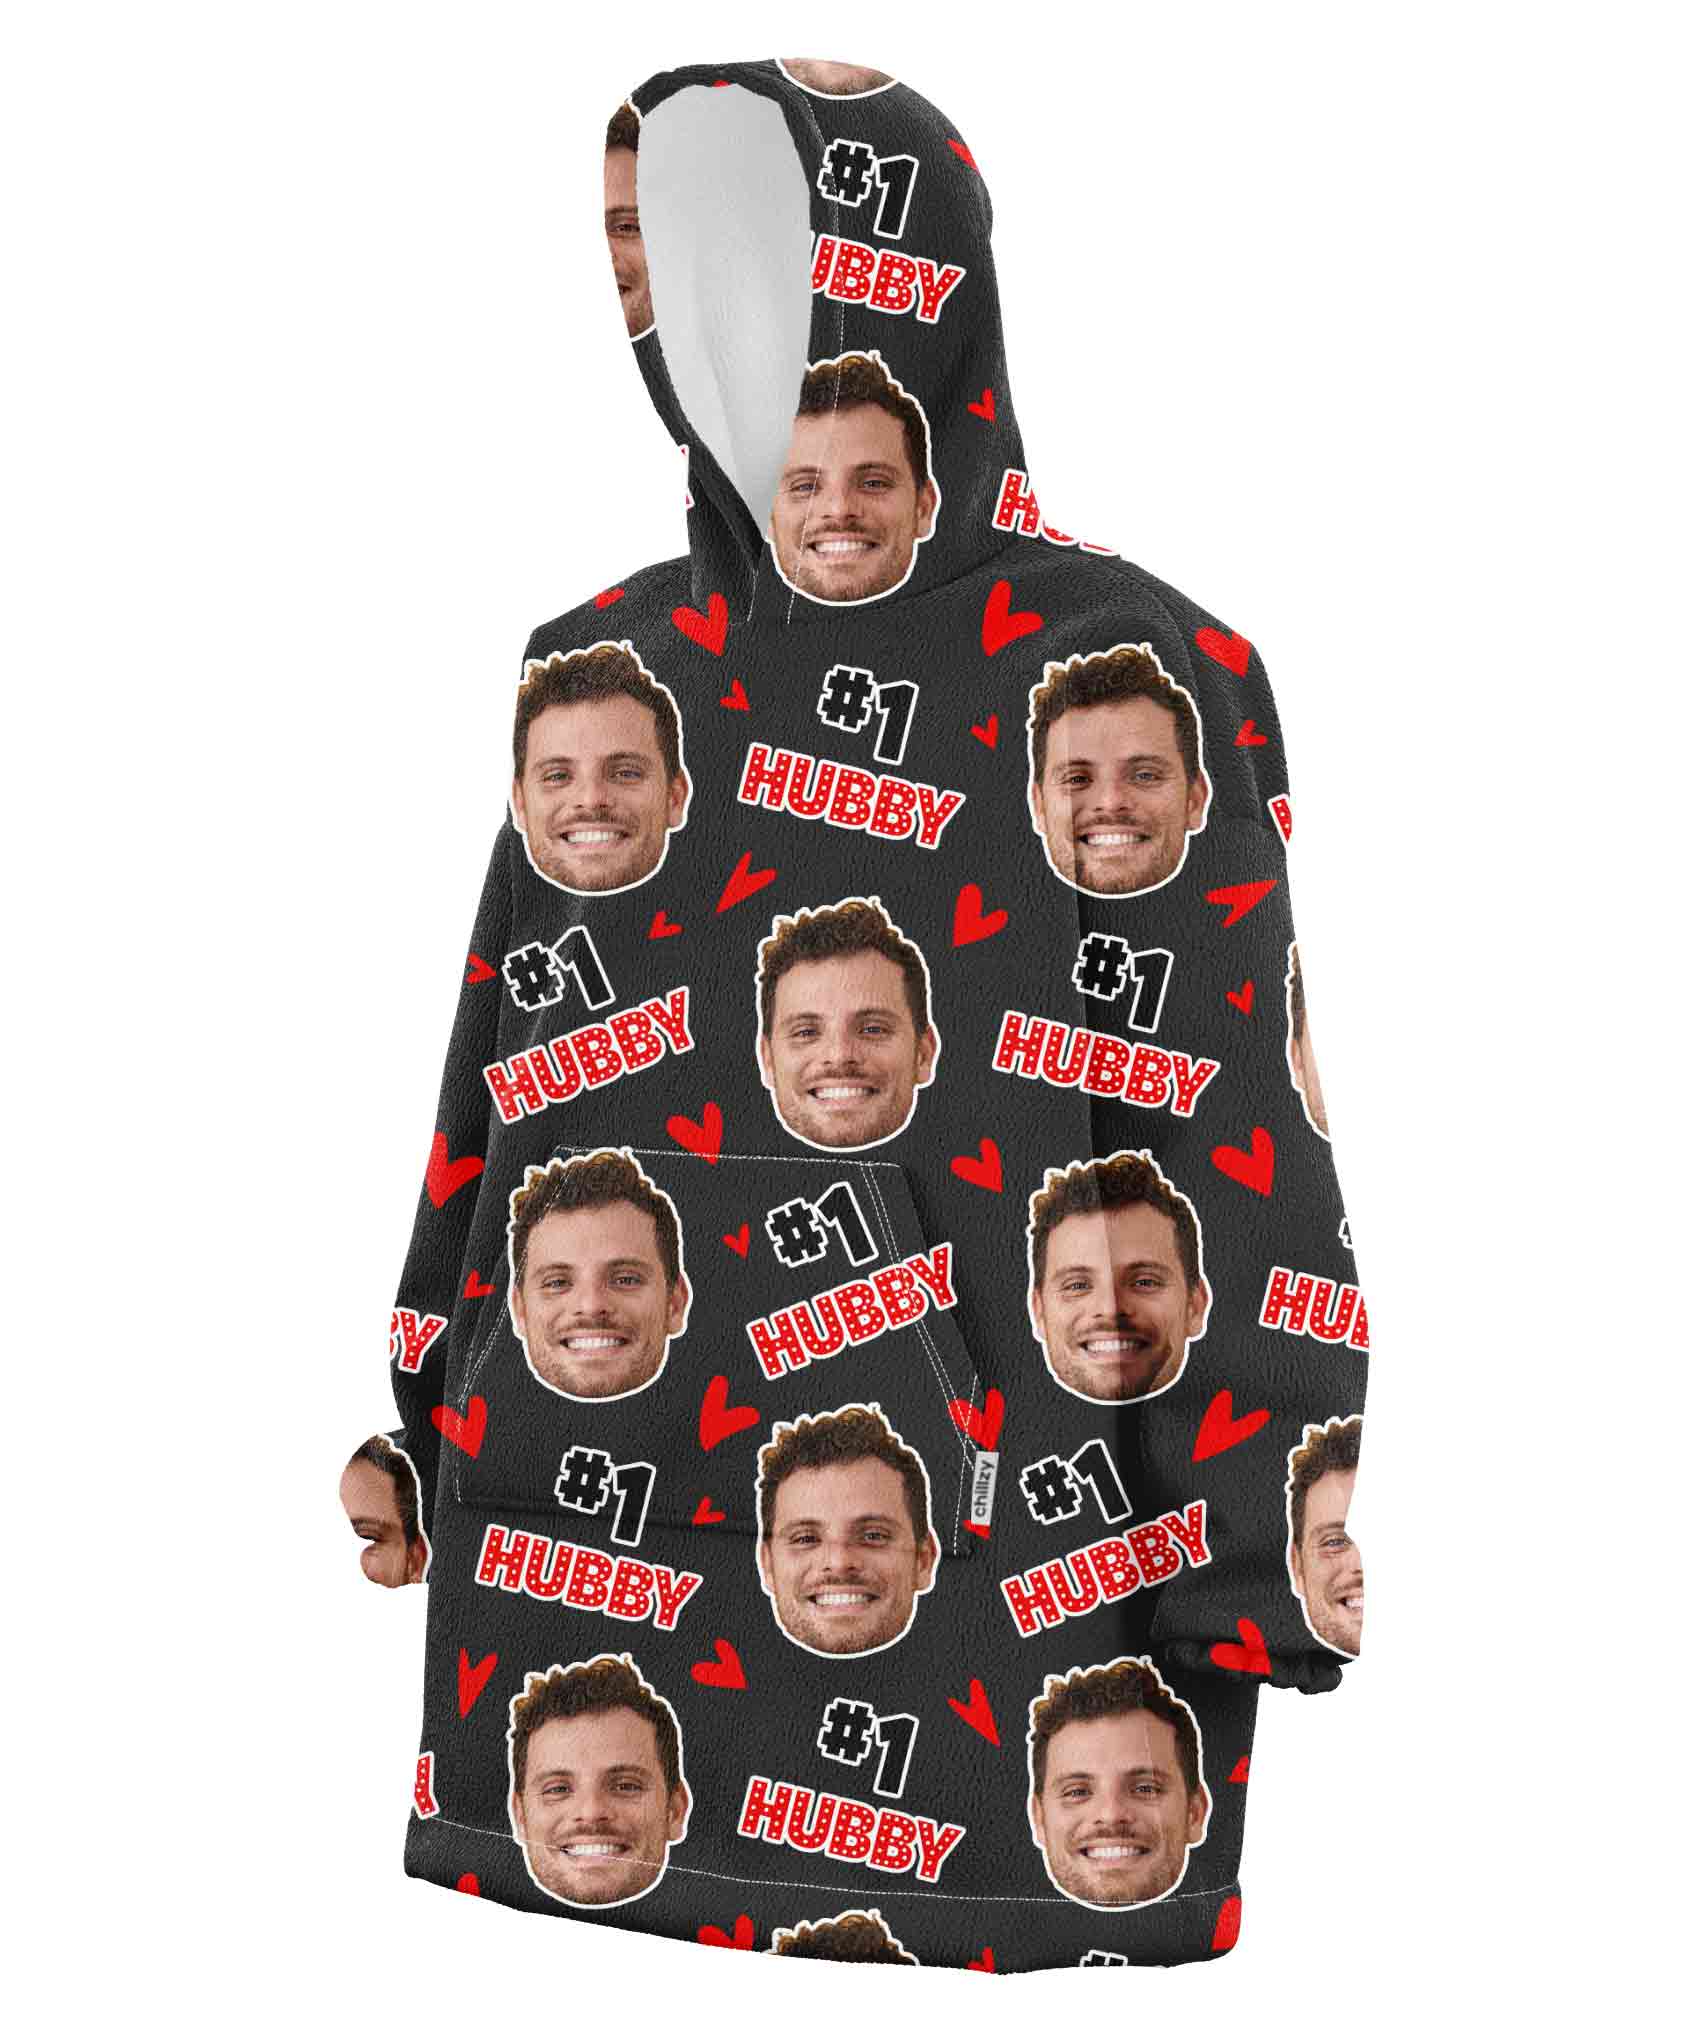 #1 Hubby Face Chillzy - #1 Hubby Hoodie Blanket